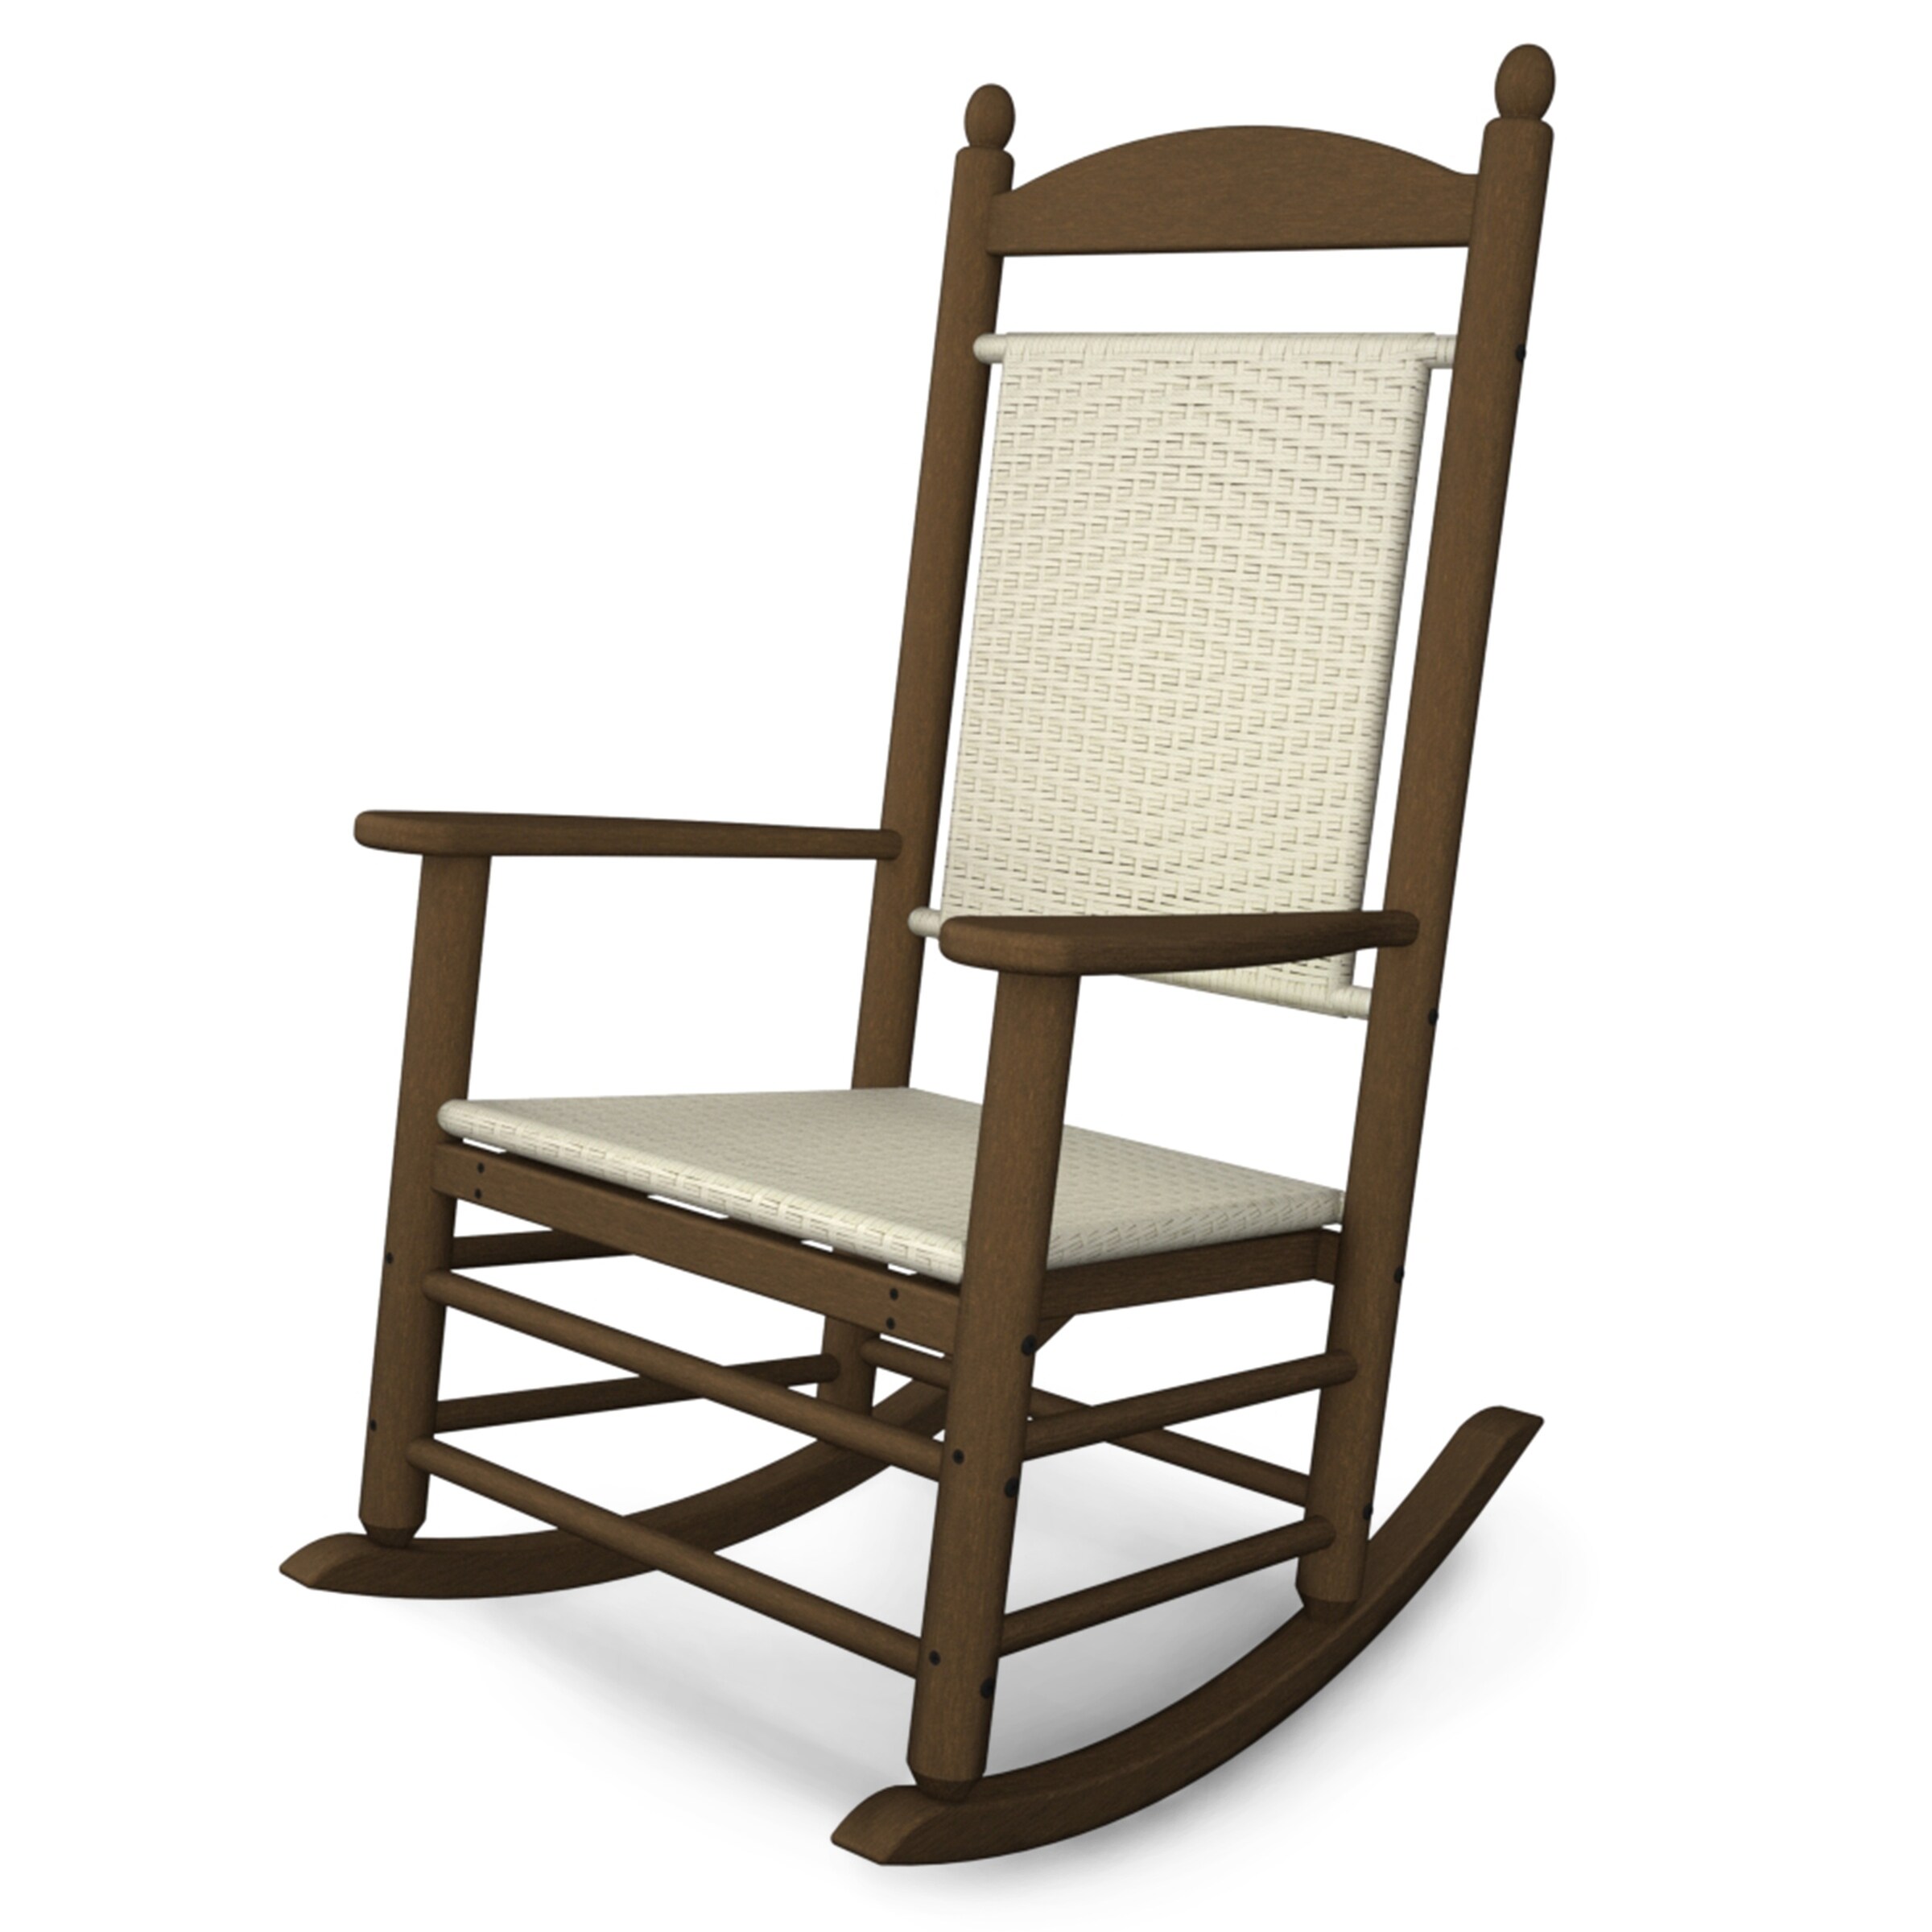 Polywood Jefferson Outdoor Woven Rocking Chair